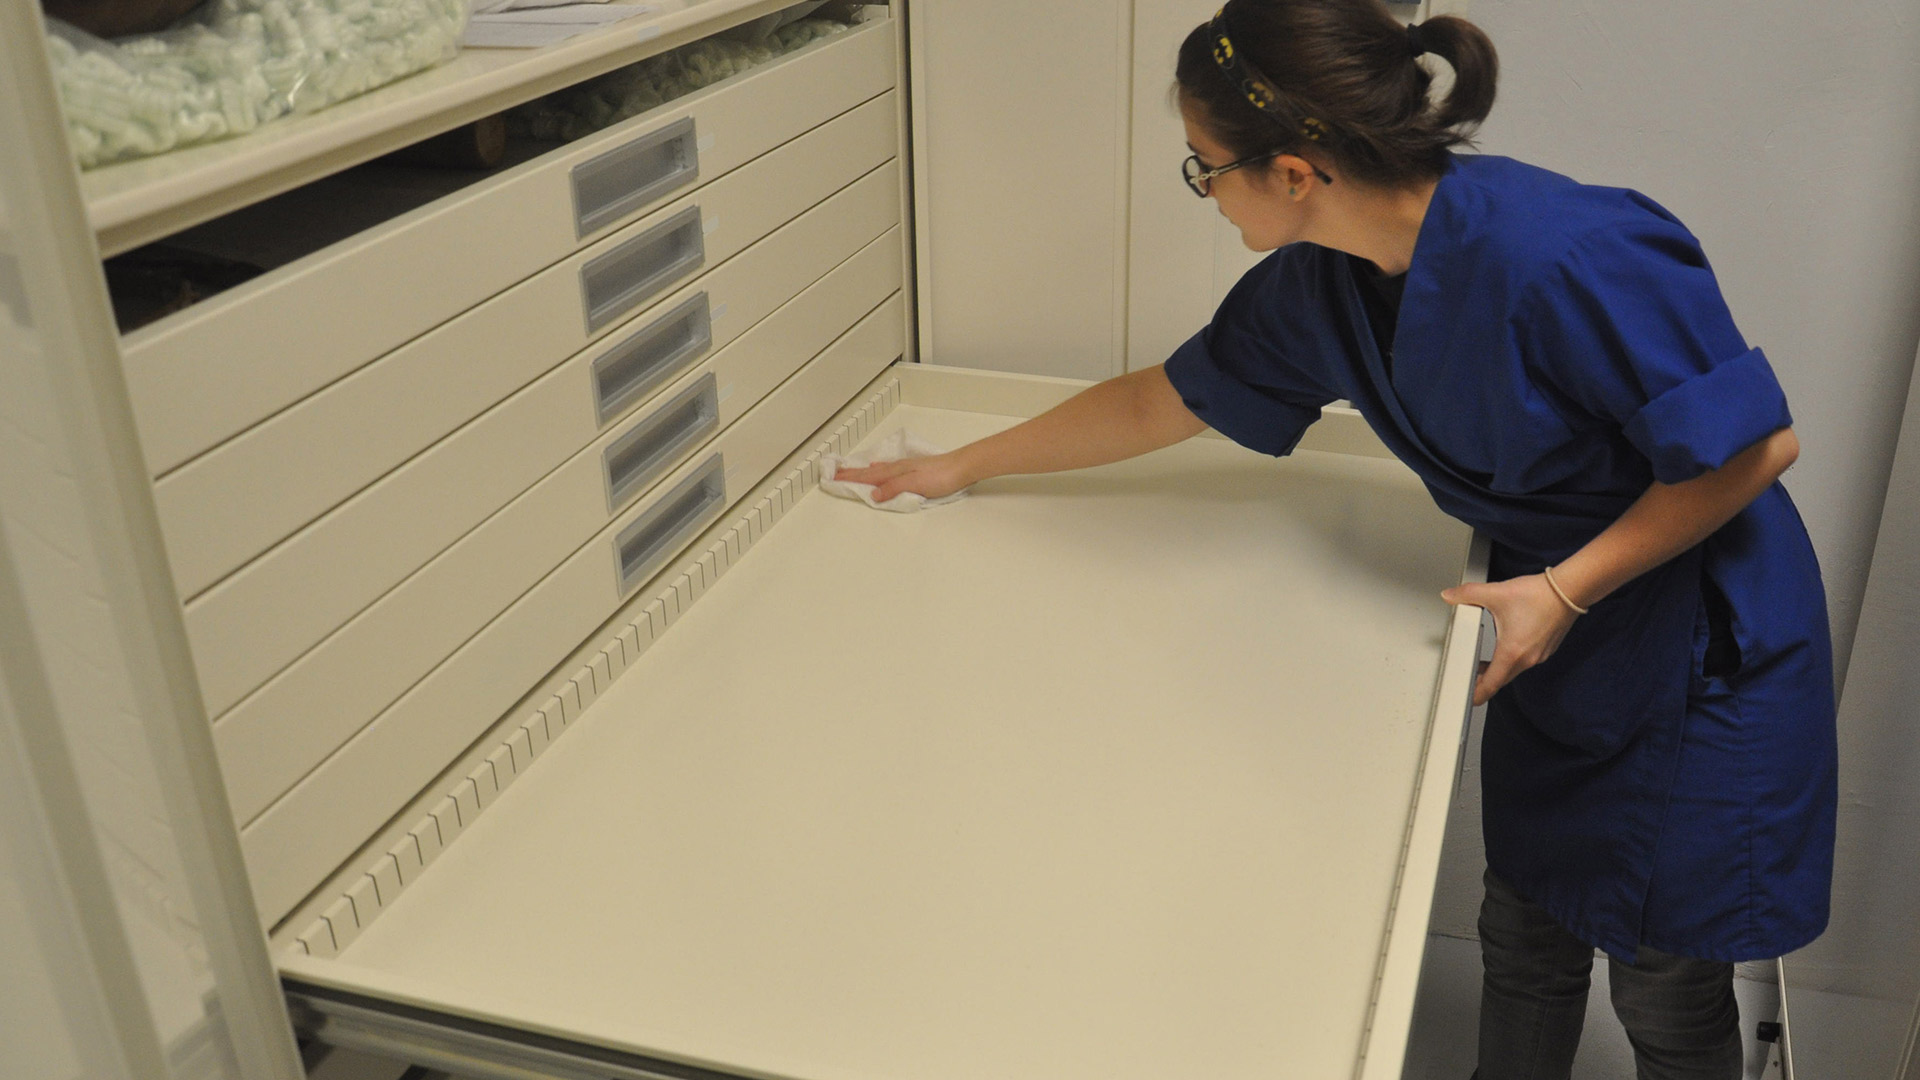 A woman in a blue smock cleans a shallow, empty metal drawer using a washrag